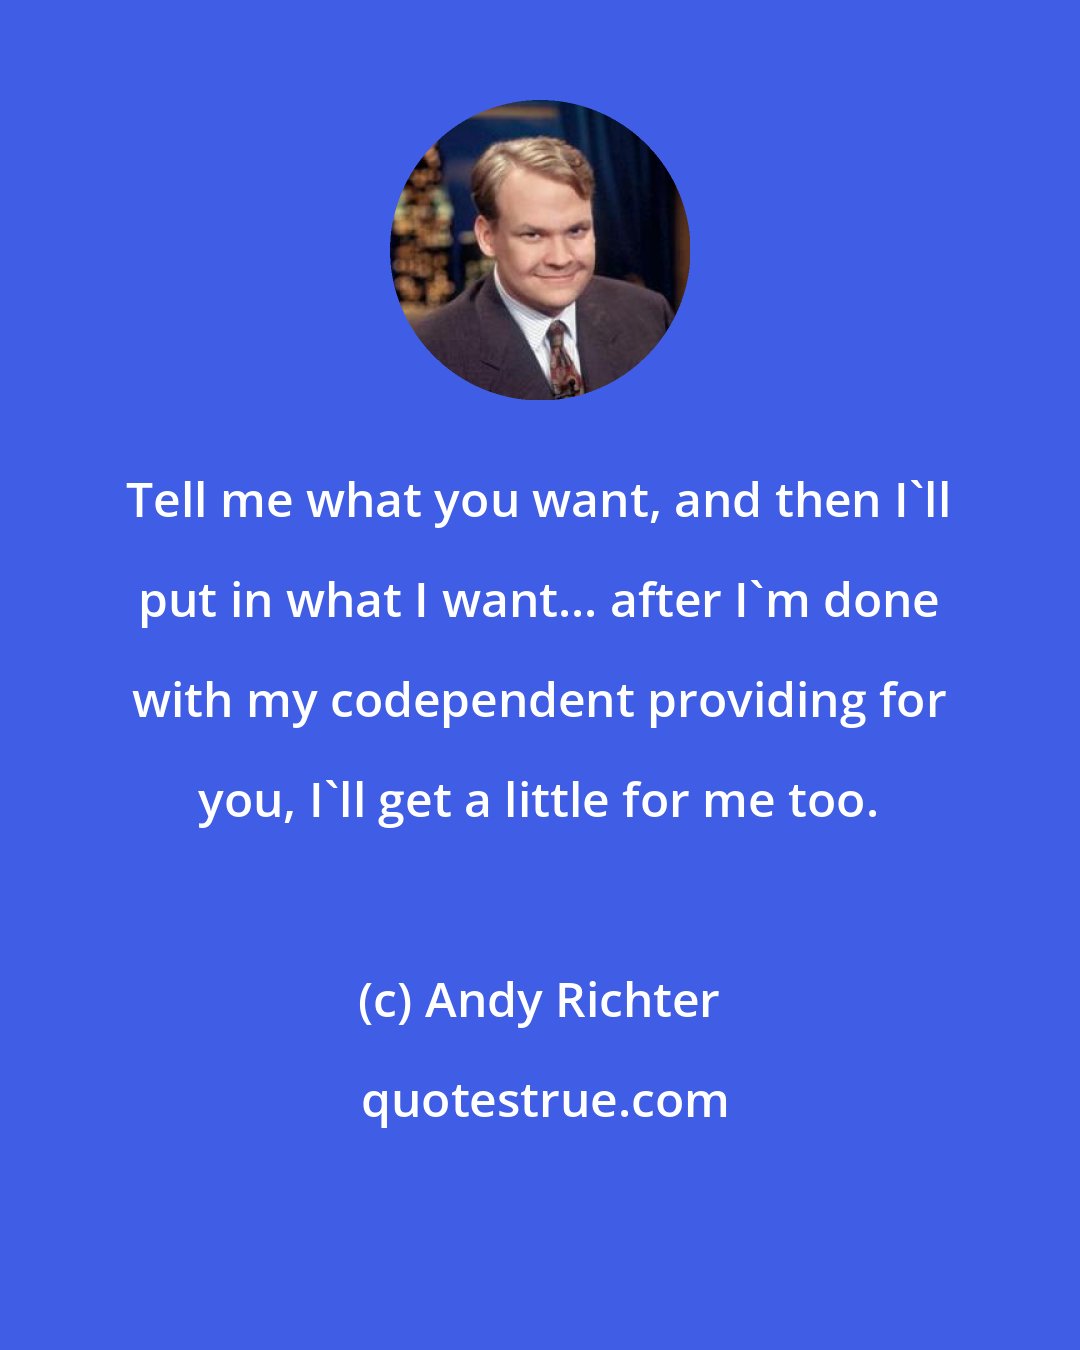 Andy Richter: Tell me what you want, and then I'll put in what I want... after I'm done with my codependent providing for you, I'll get a little for me too.